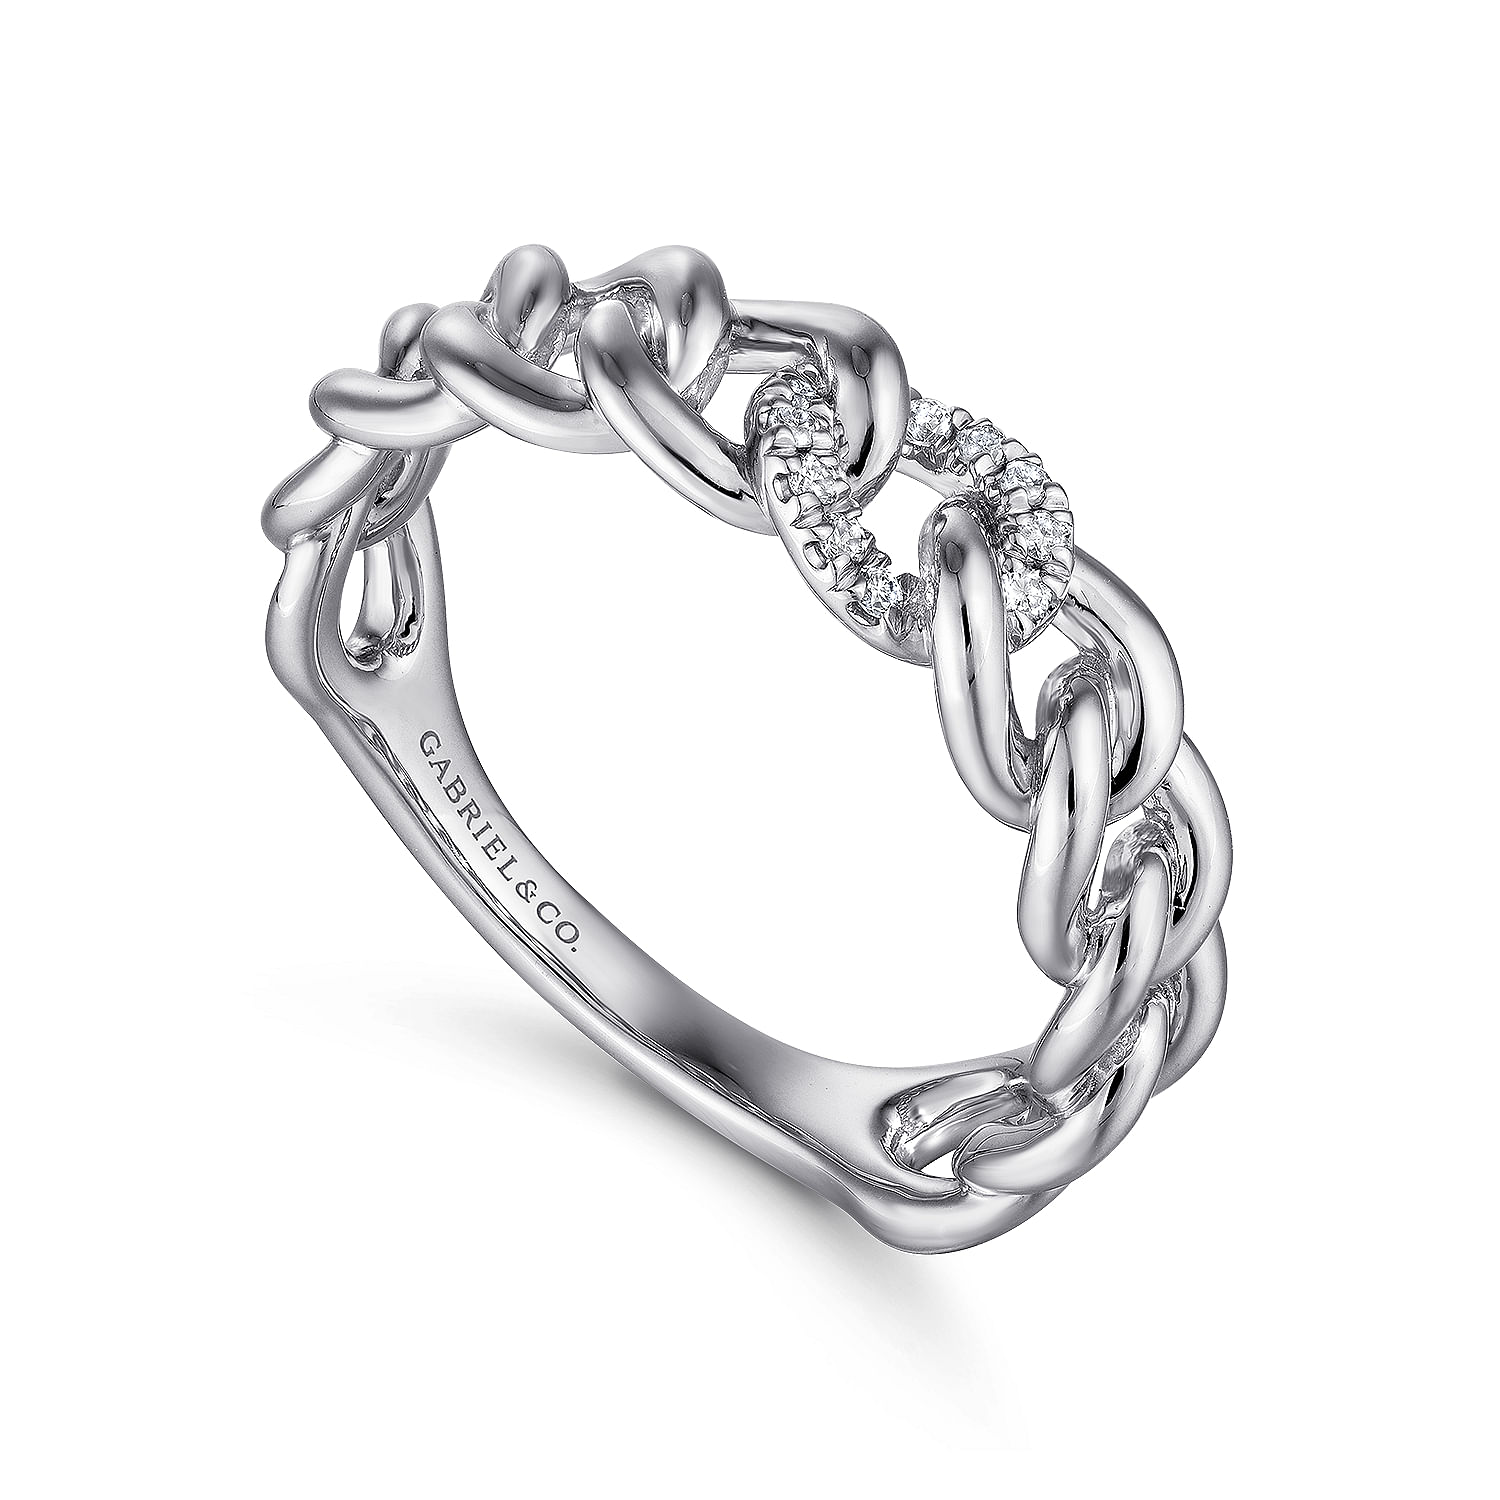 14K White Gold Chain Link Ring Band with Pavé Diamond Station